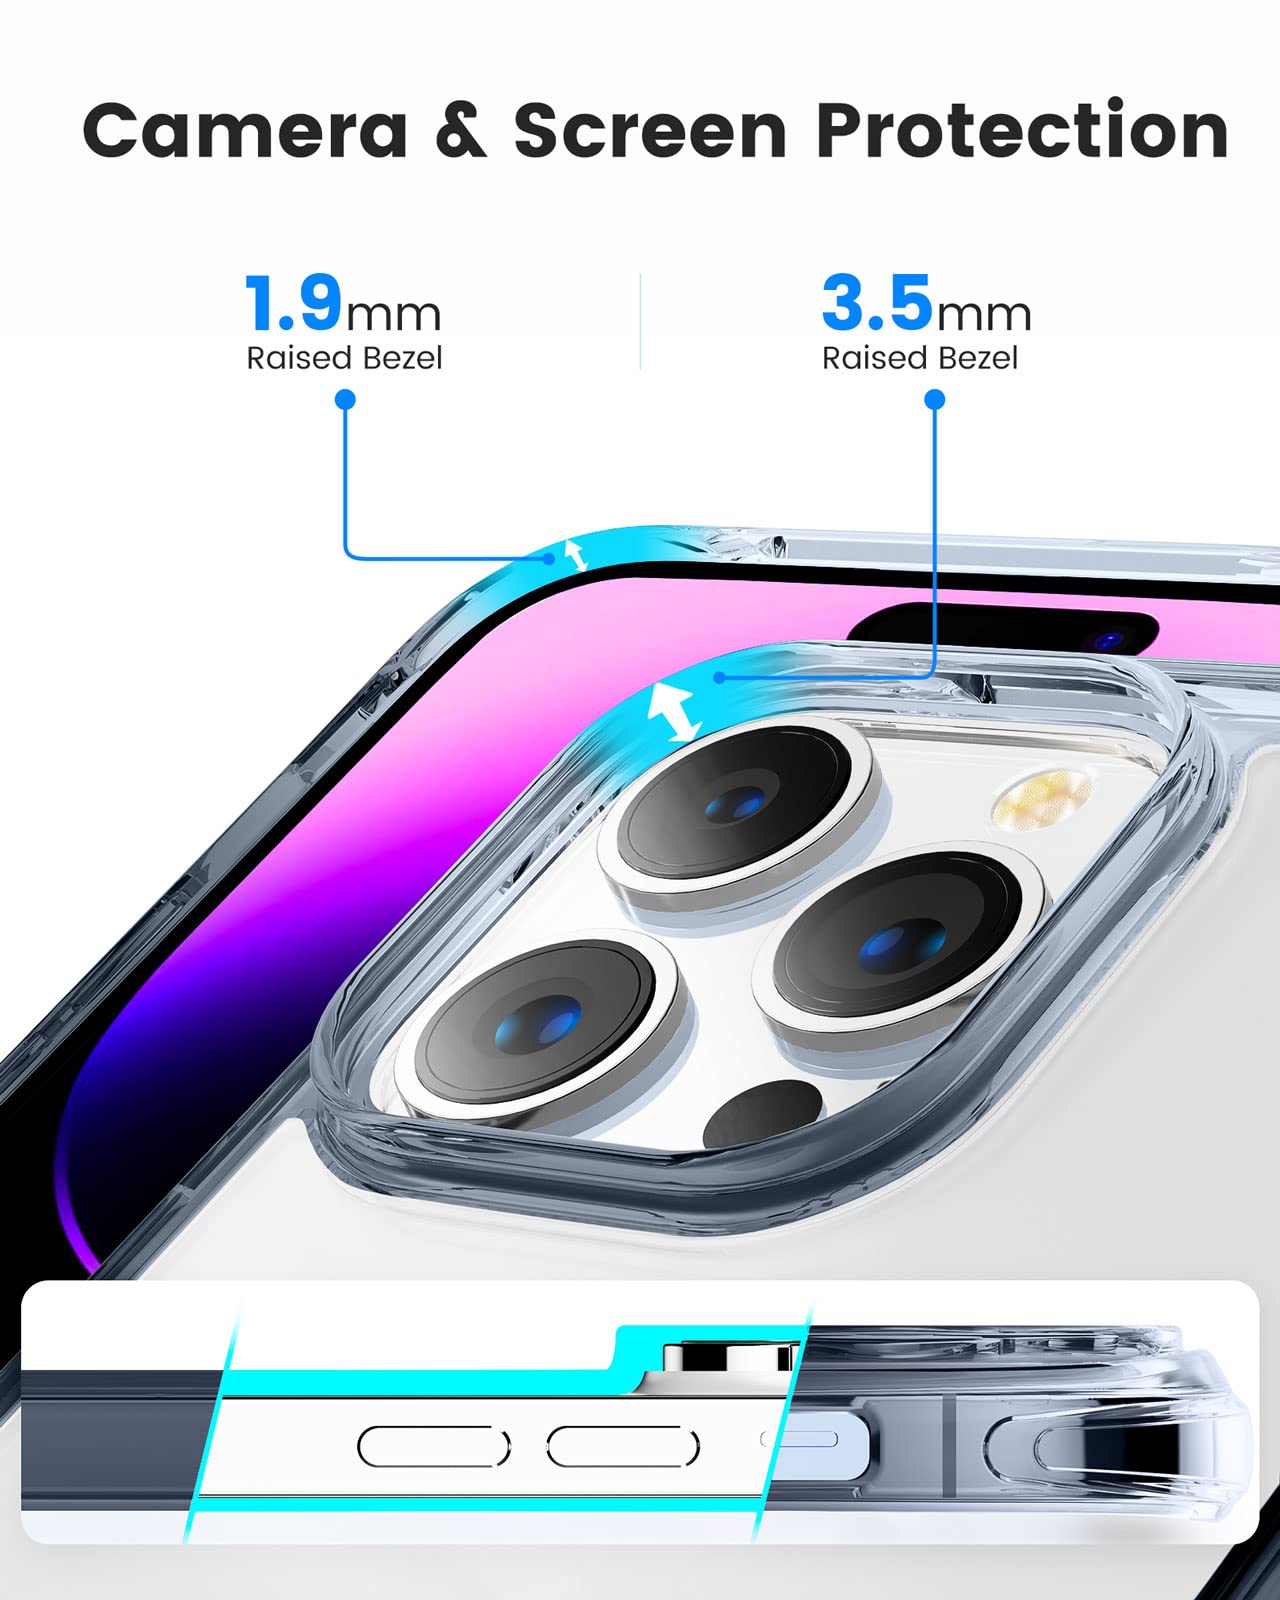 Mkeke for iPhone 14 Pro Case Clear, [Military Grade Protection] [Not Yellowing] Shockproof Phone Case for Apple iPhone 14 Pro 2022 -Gradient Black Clear